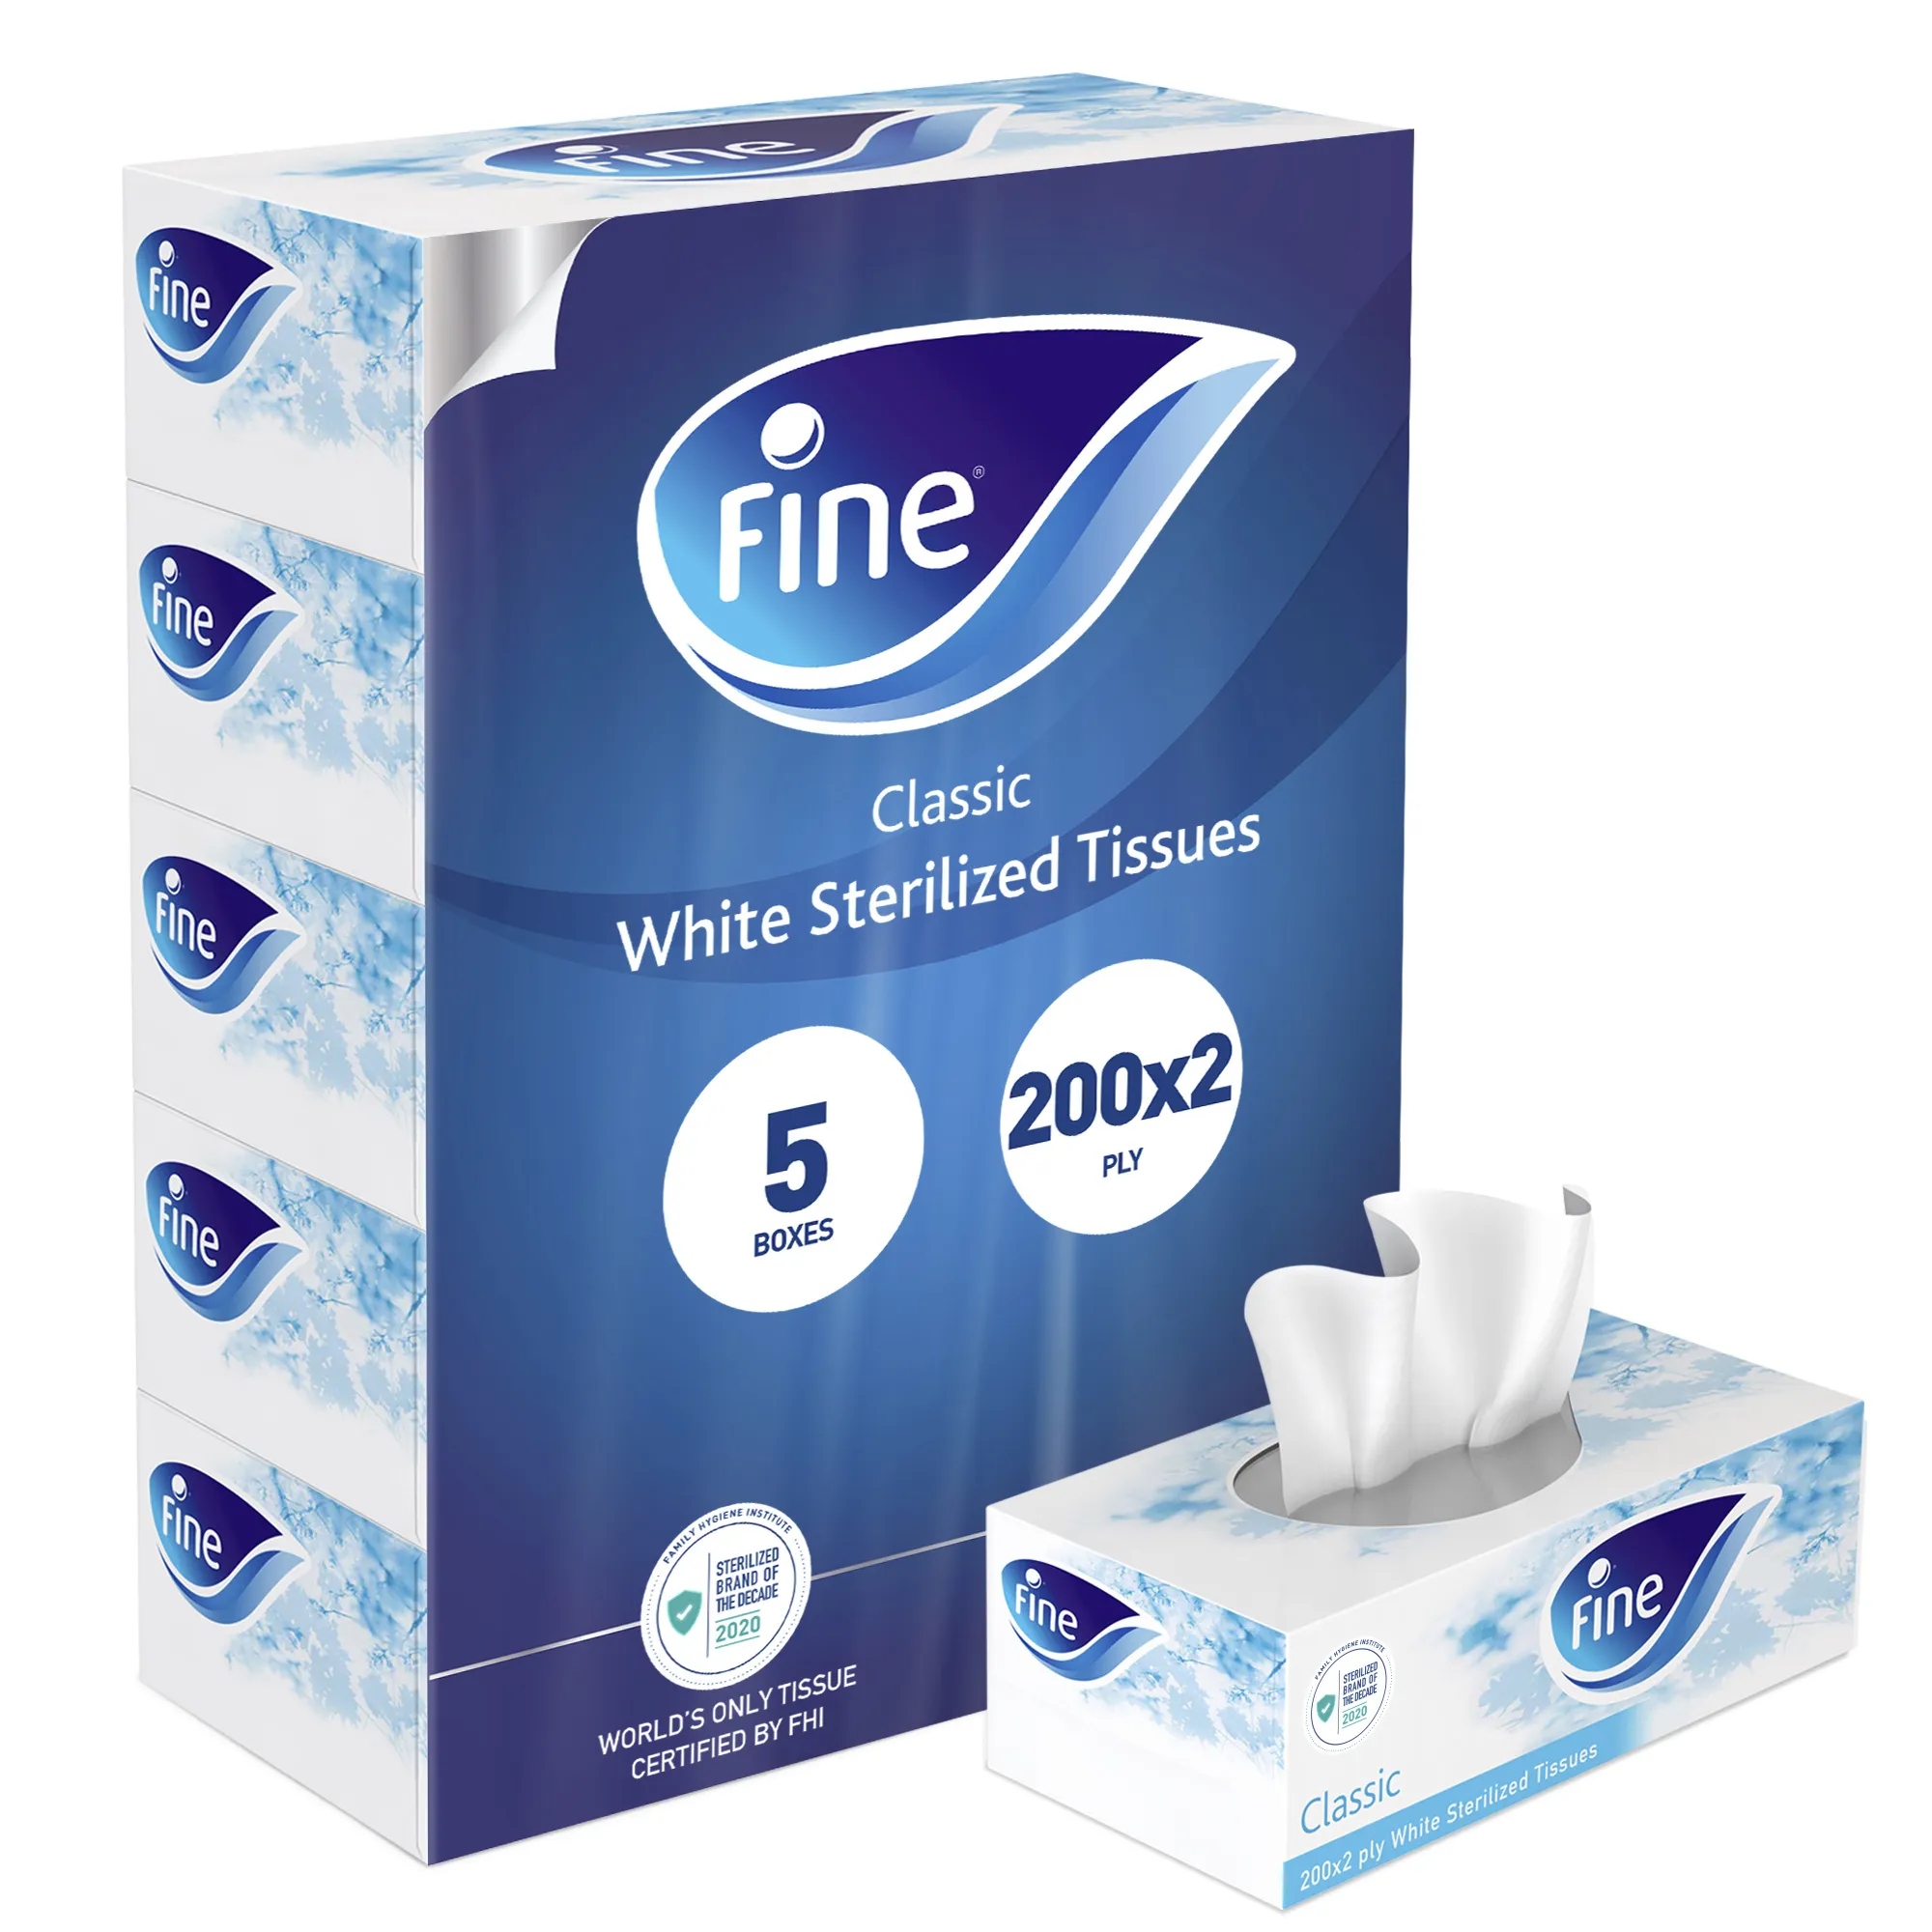 Fine, Facial Tissues, Classic, 200x2 Ply White Tissues, pack of 5 boxes, 1000 tissues